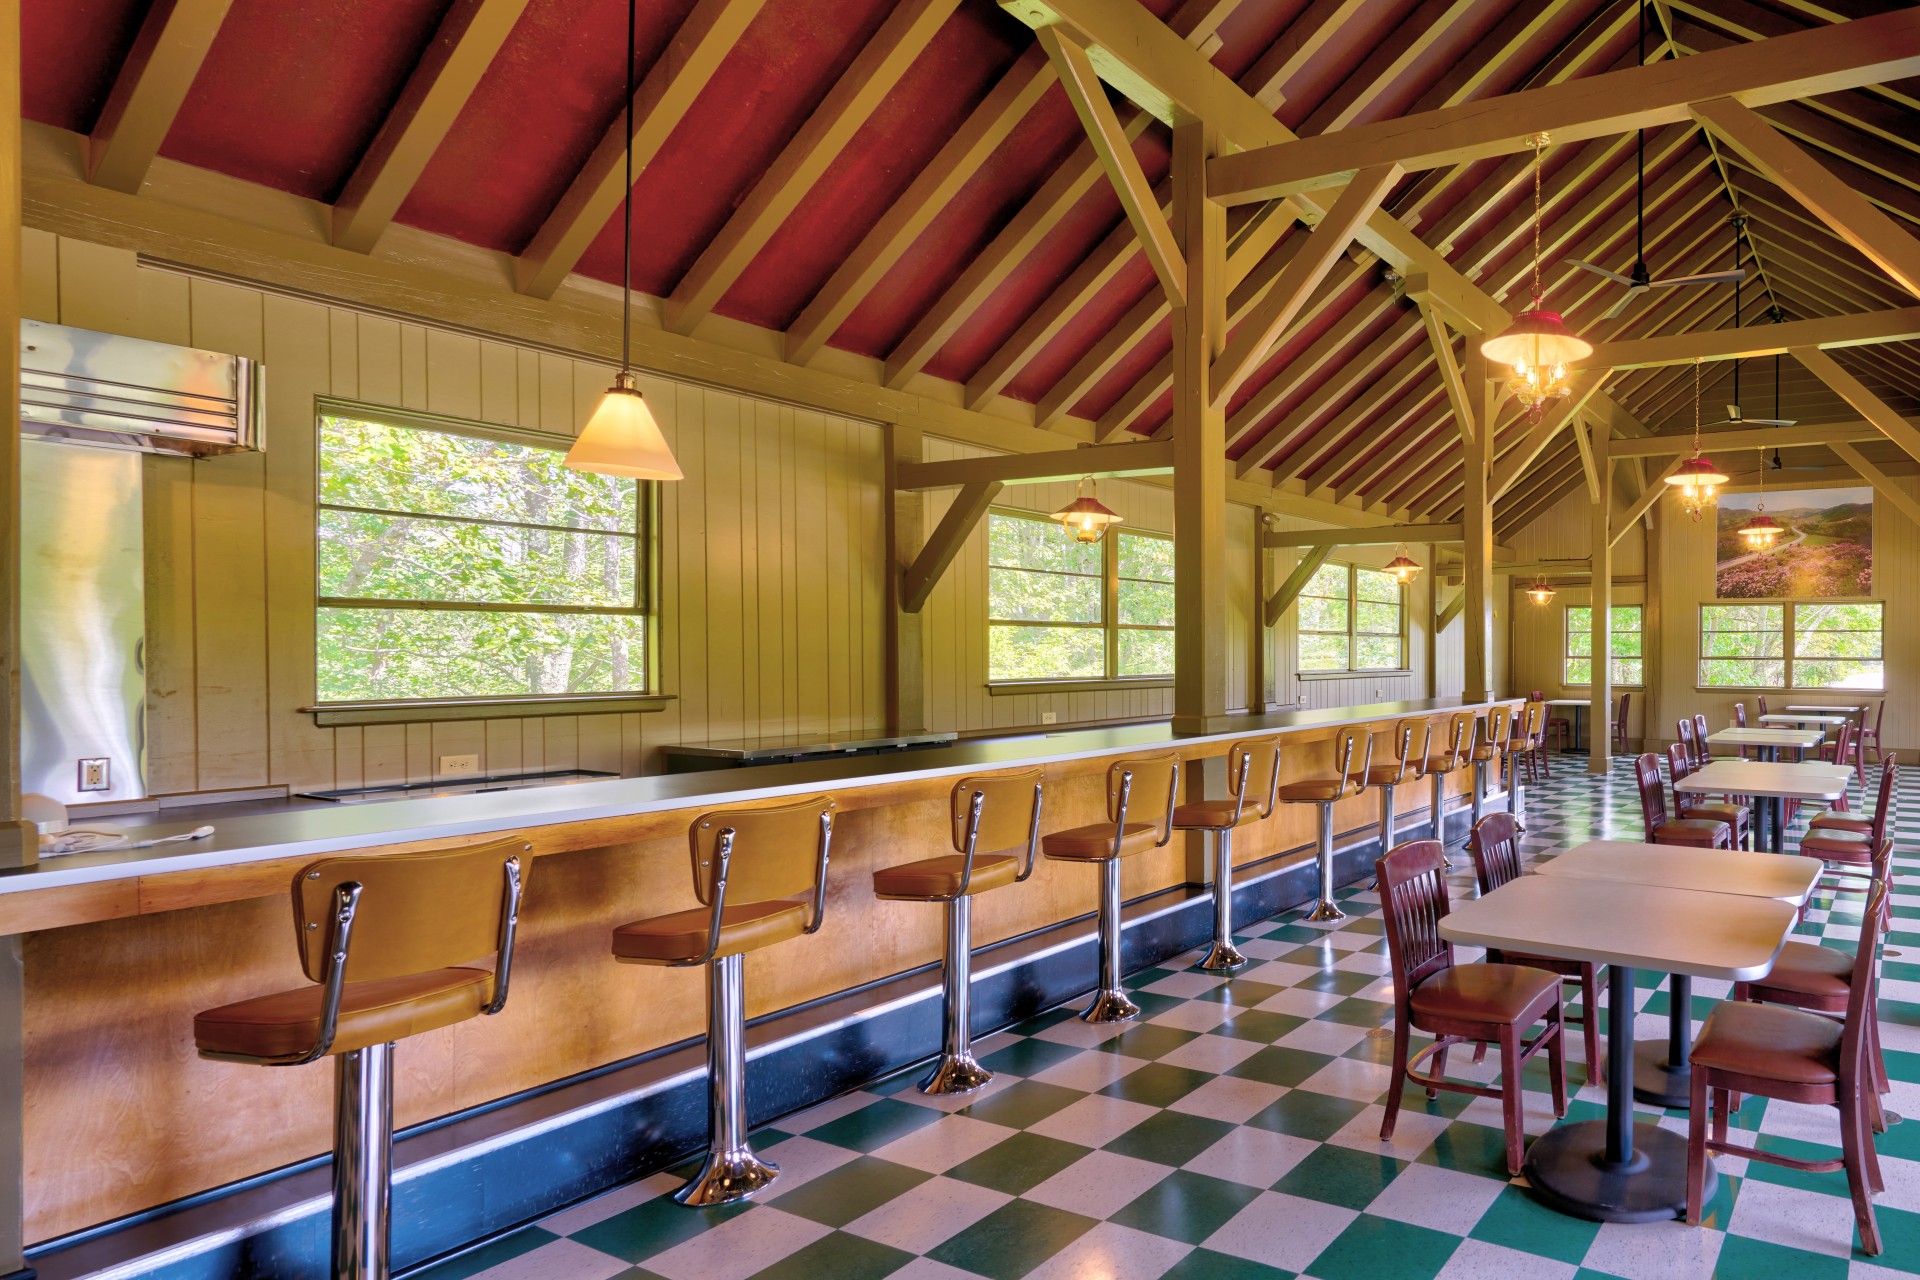 The interior of The Bluffs Restaurant after renovations.